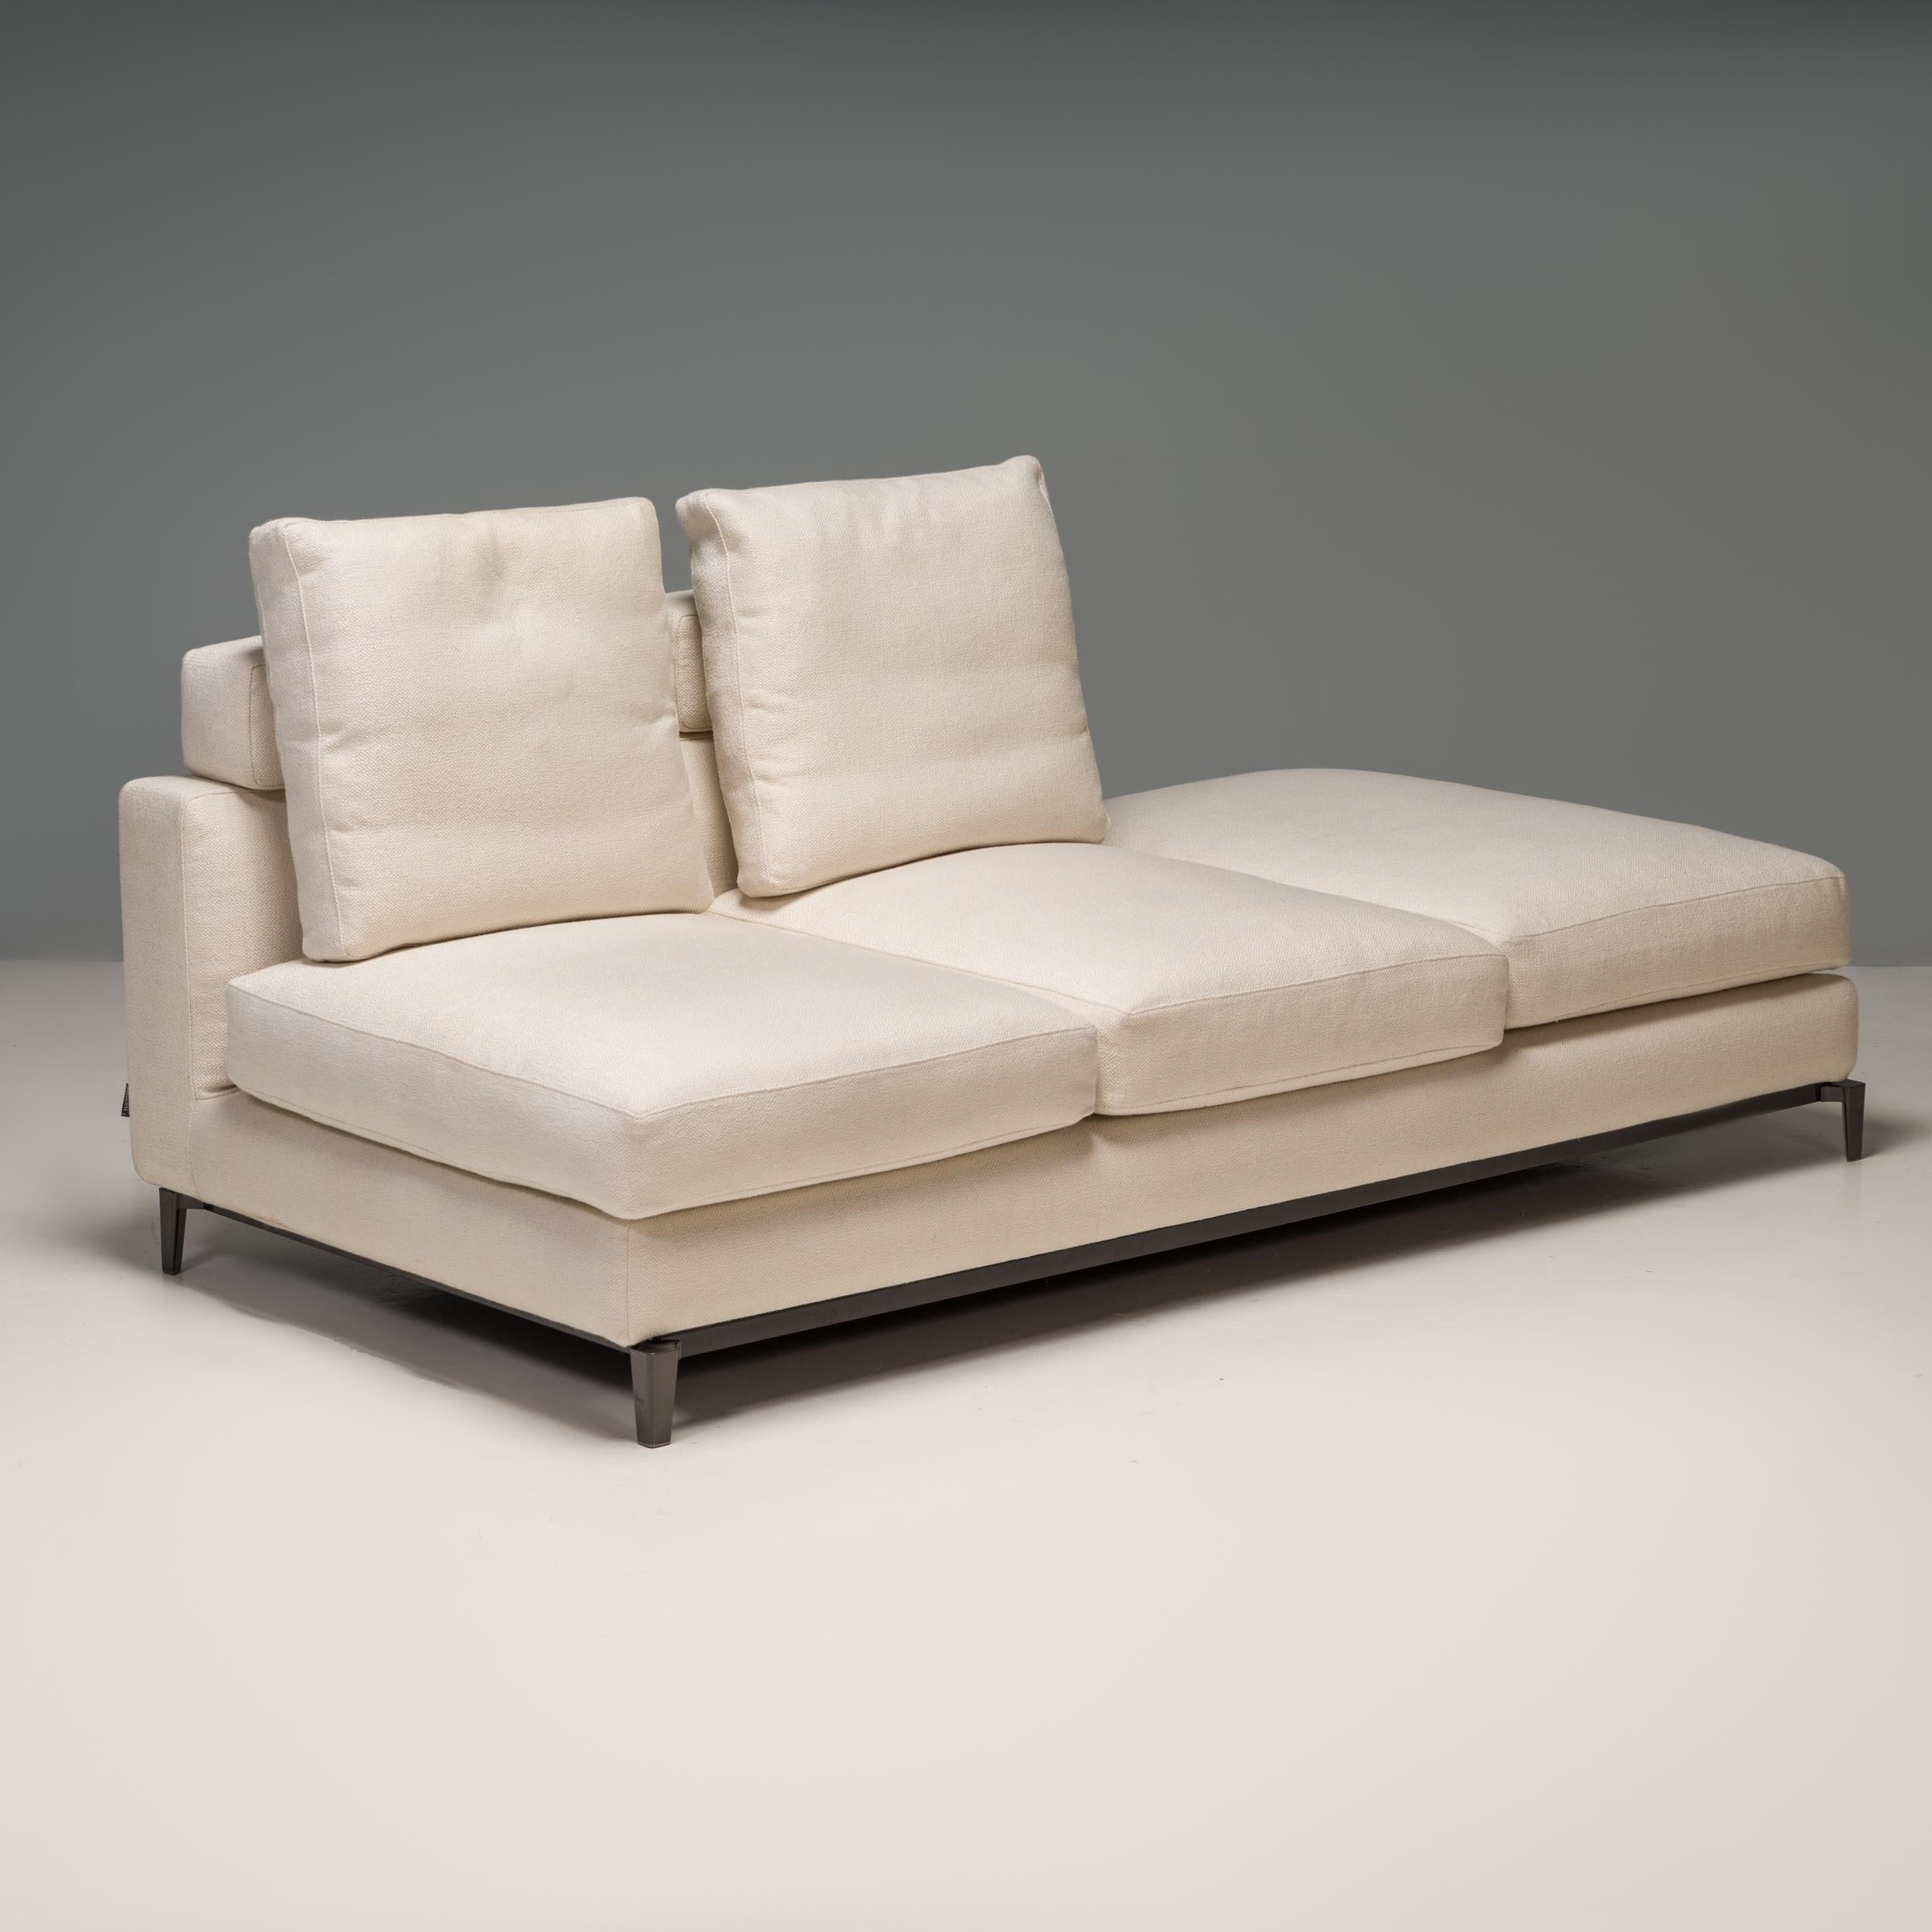 Designed by Rodolfo Dordoni for Minotti, the Andersen sofa formed part of the 2010 Senza Tempo Collection and embodies timeless Italian design.

Fully upholstered in white fabric, the sofa has no arms, creating an open seating platform with a